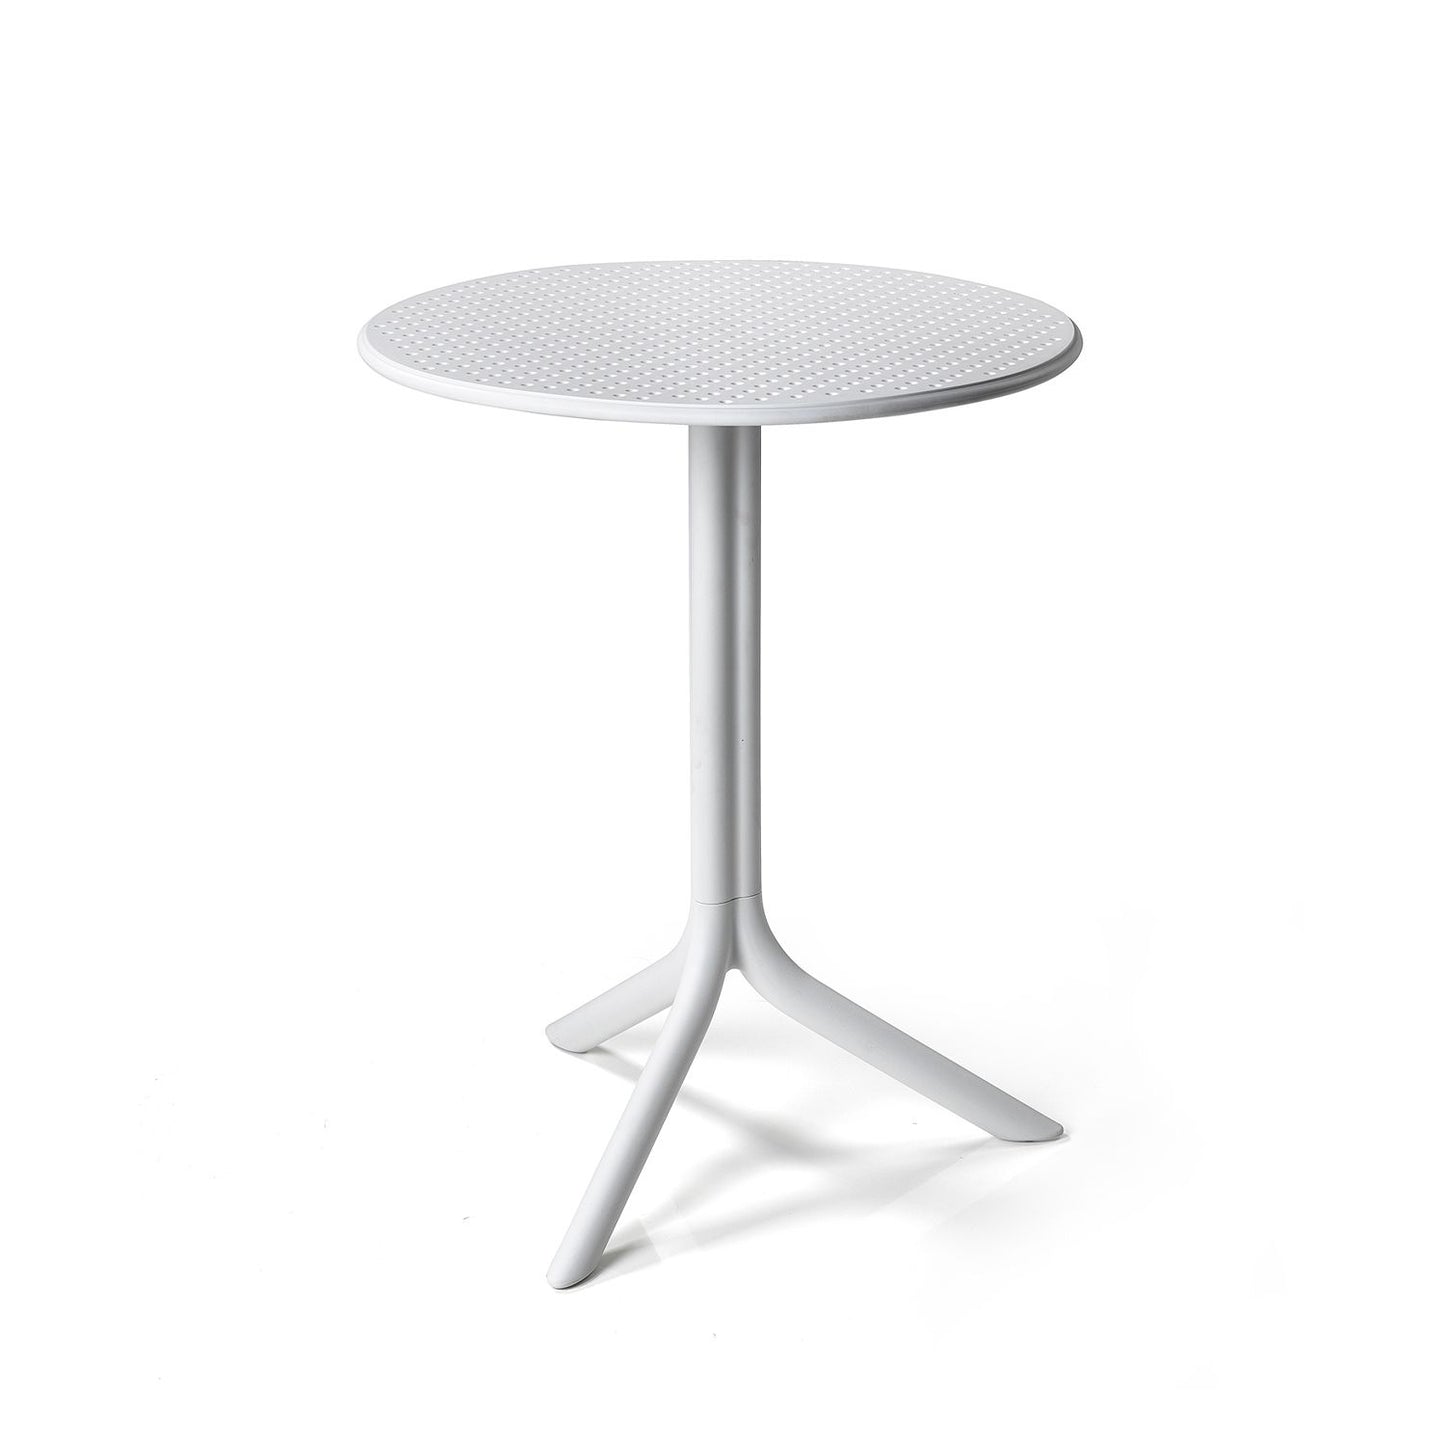 Step Garden Table By Nardi